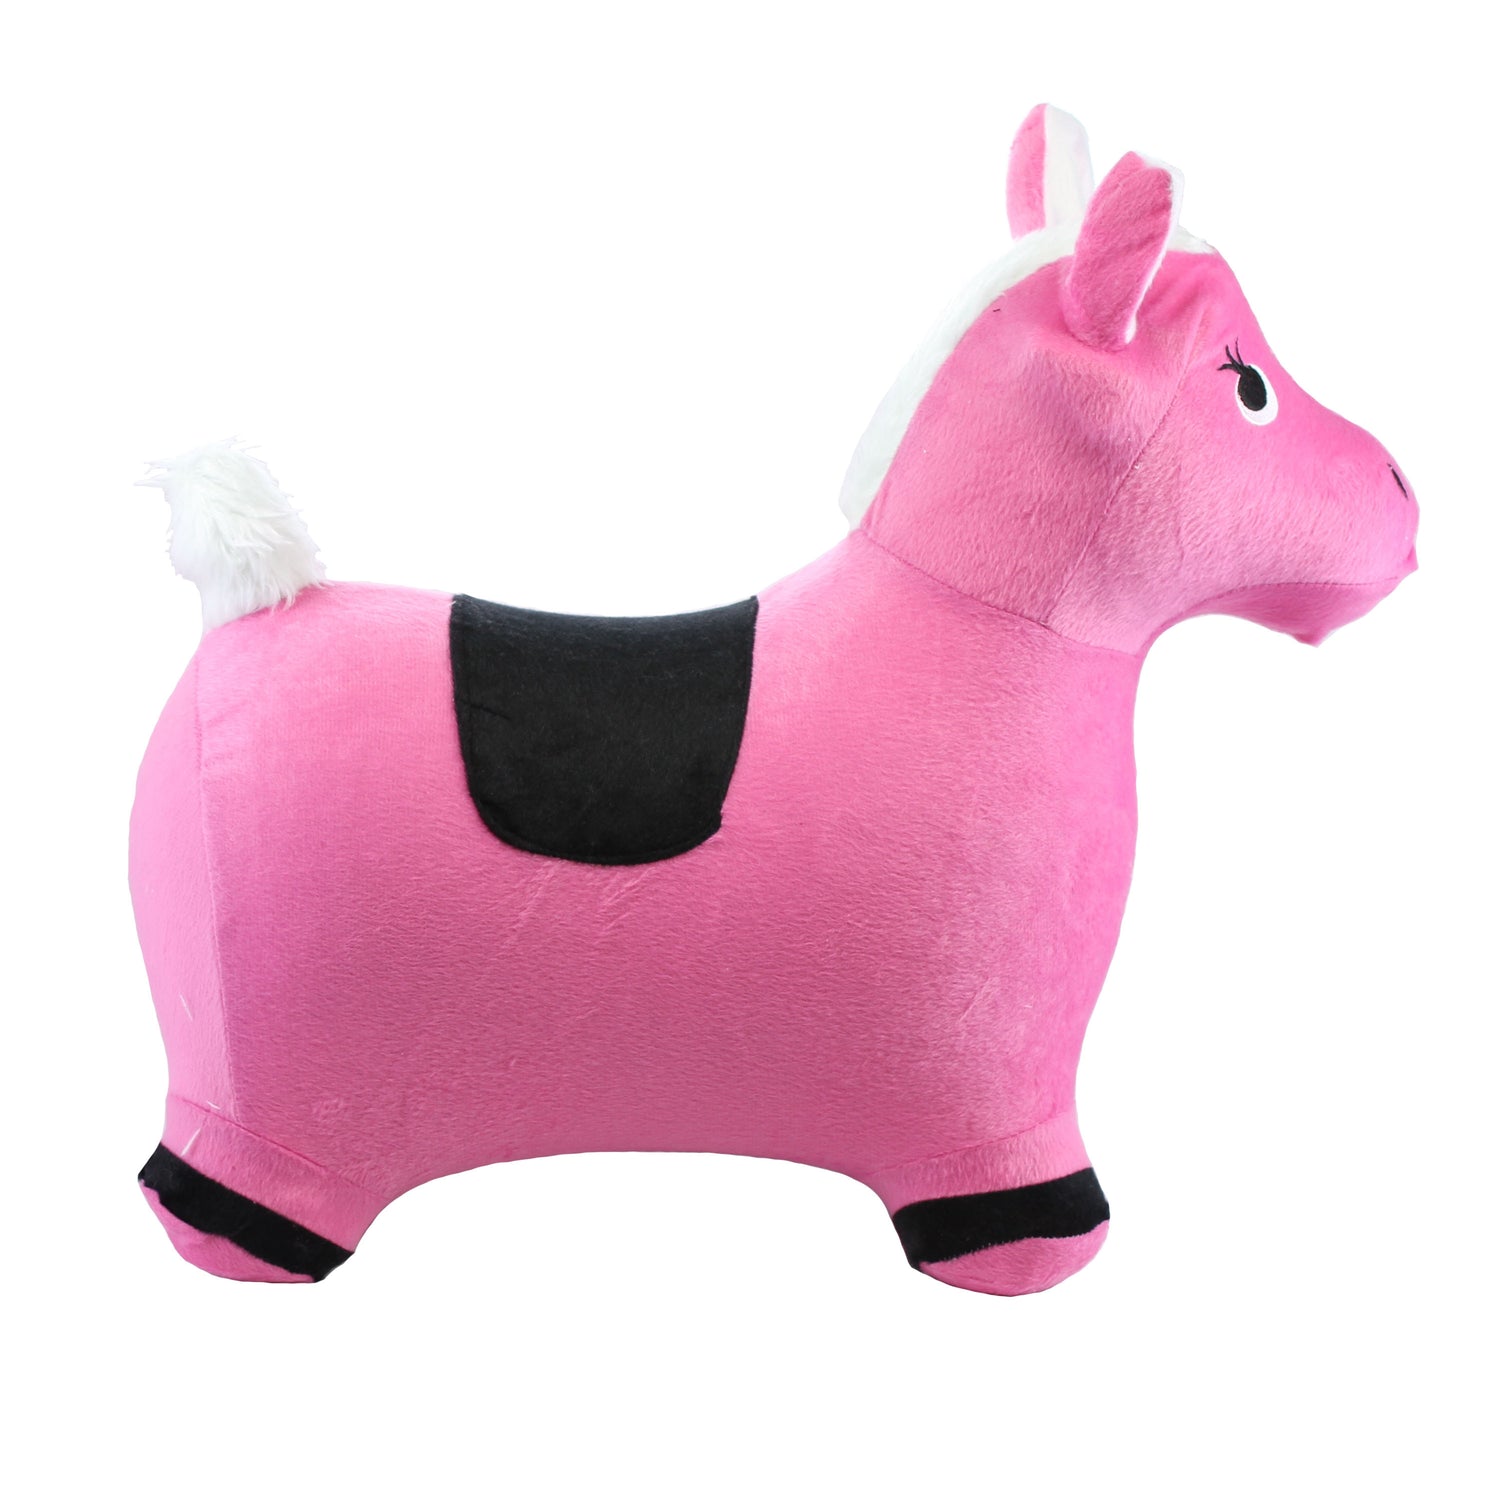 Chromo Bouncy Hopping Toy Cute Pony Inflatable Jumper w/ Washable Plush Cover (New)